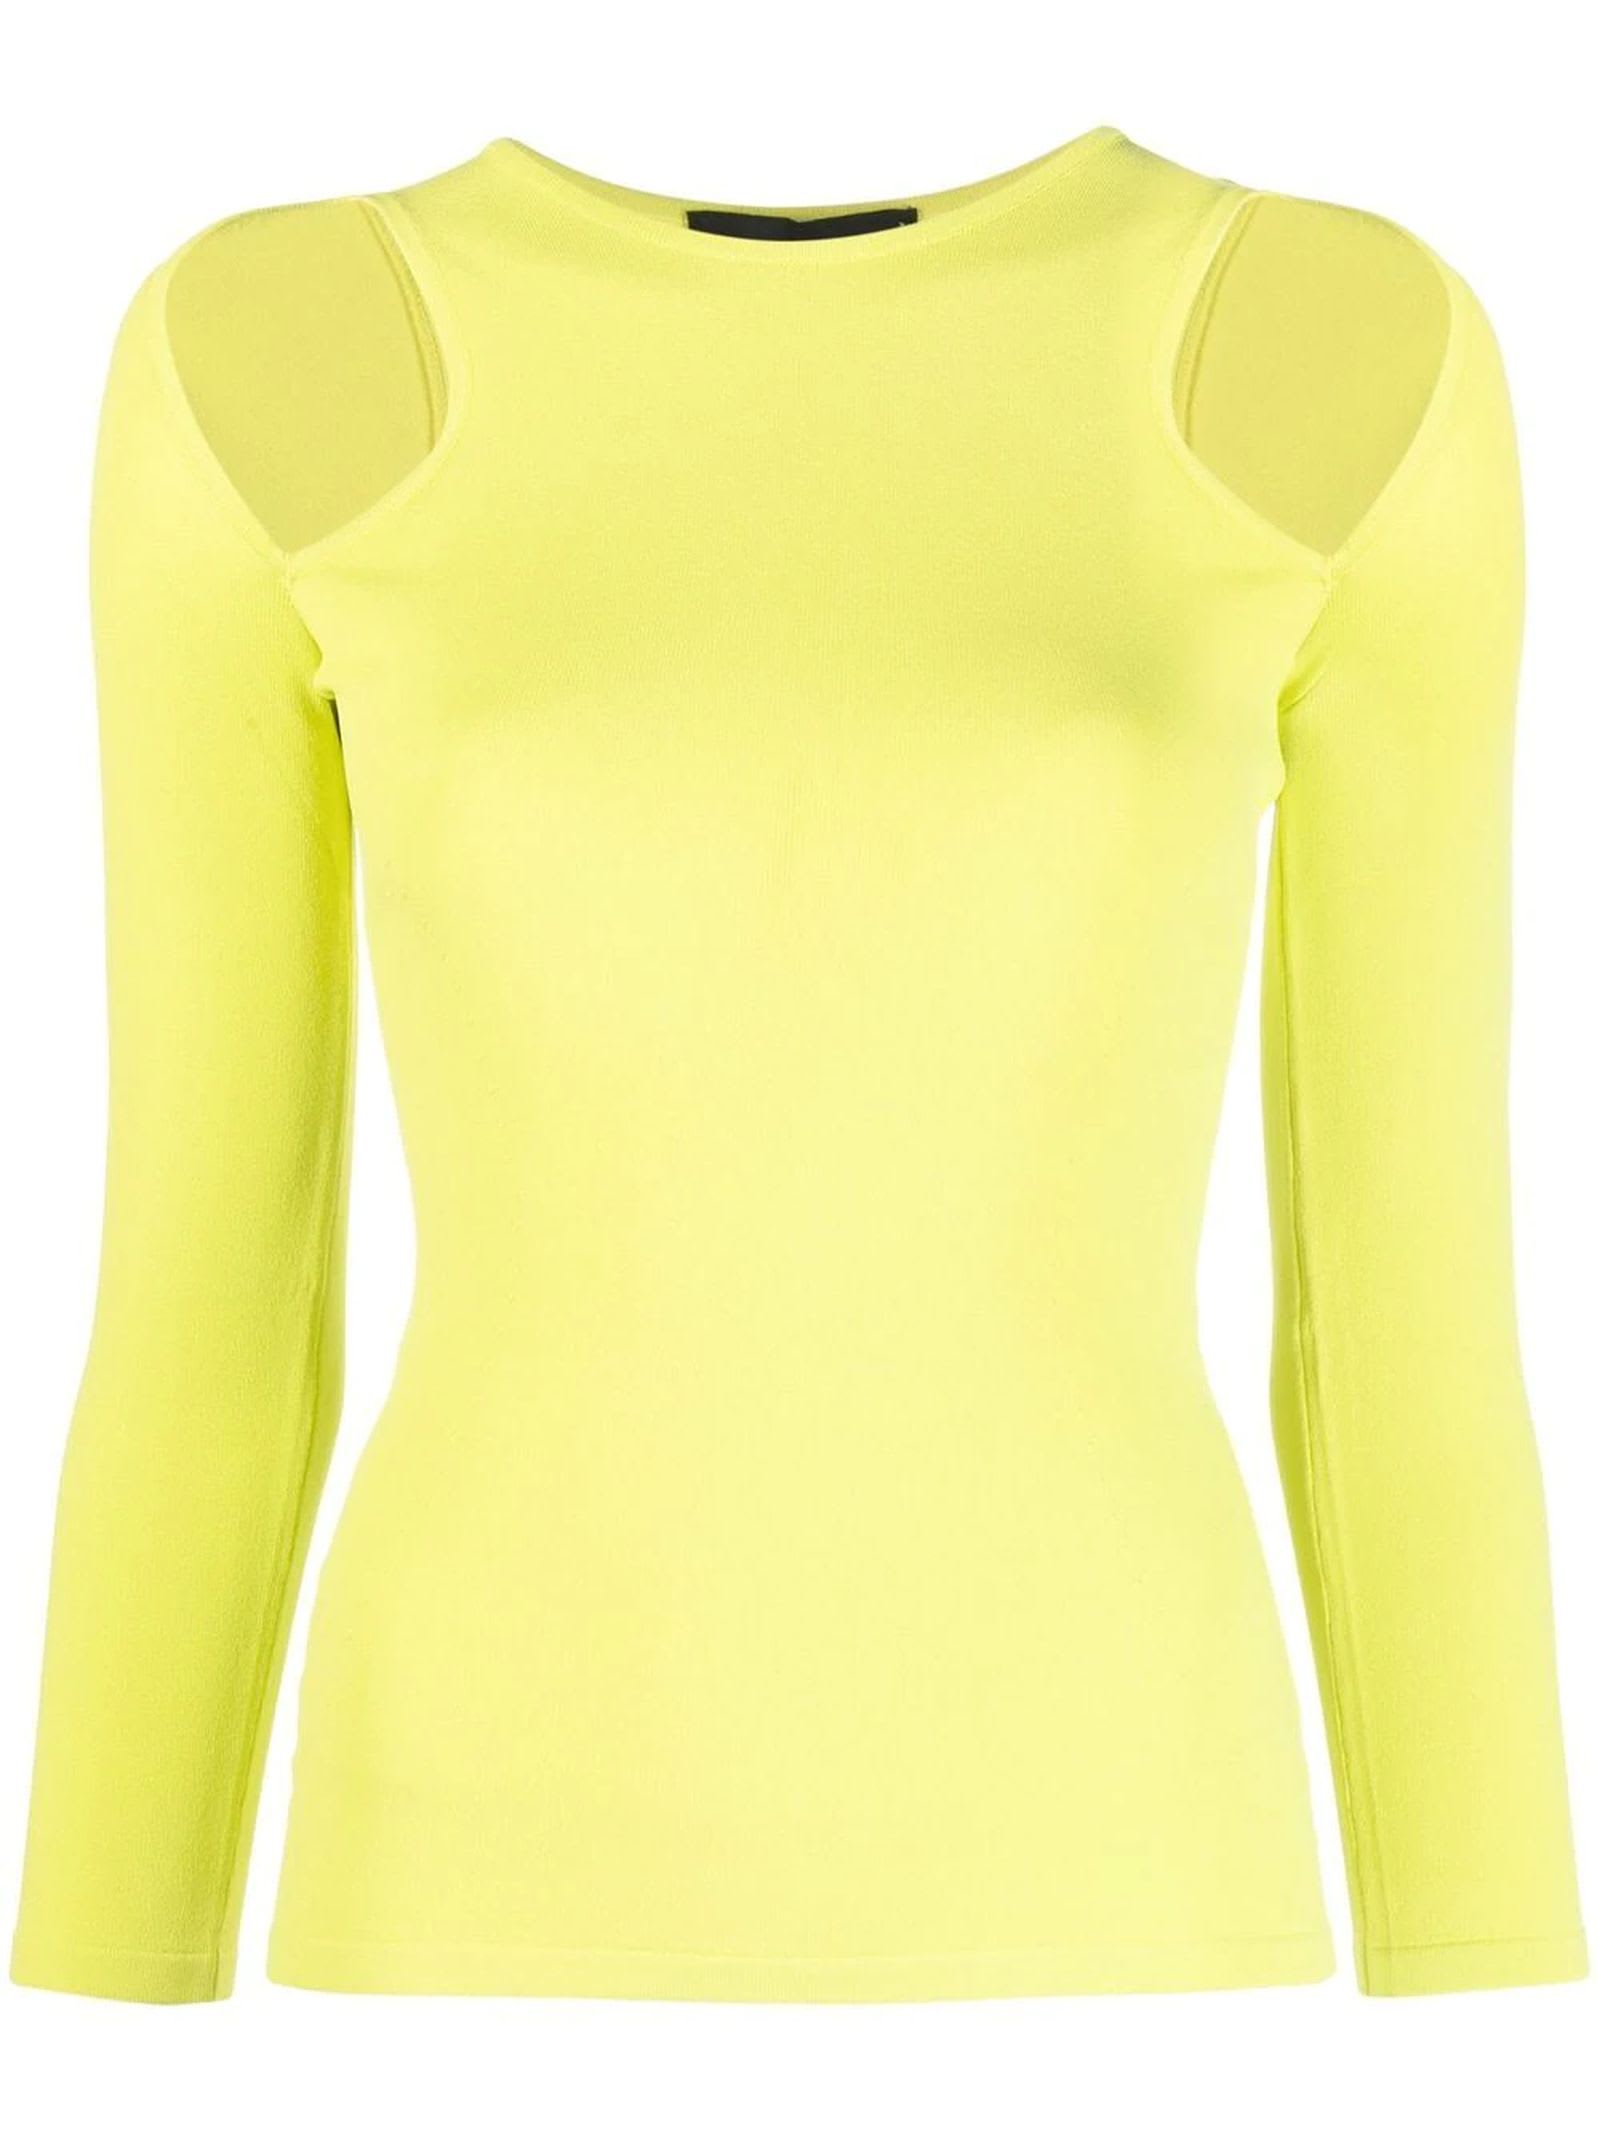 DSQUARED2 FLUORESCENT YELLOW TOP